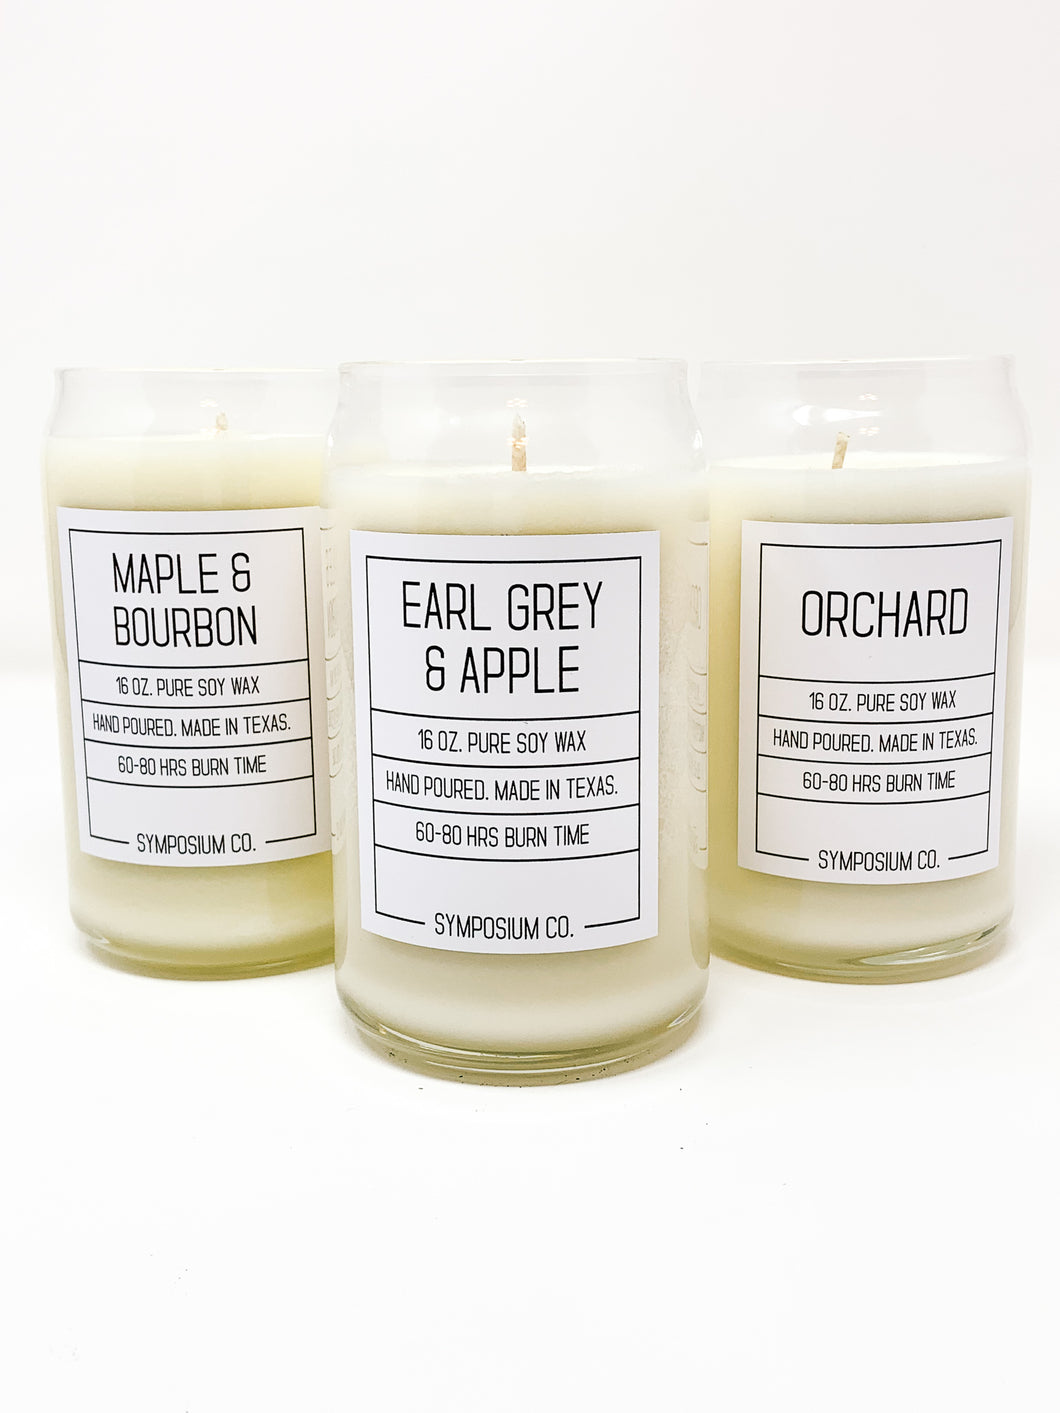 Fall Candle Kit – Scent Workshop